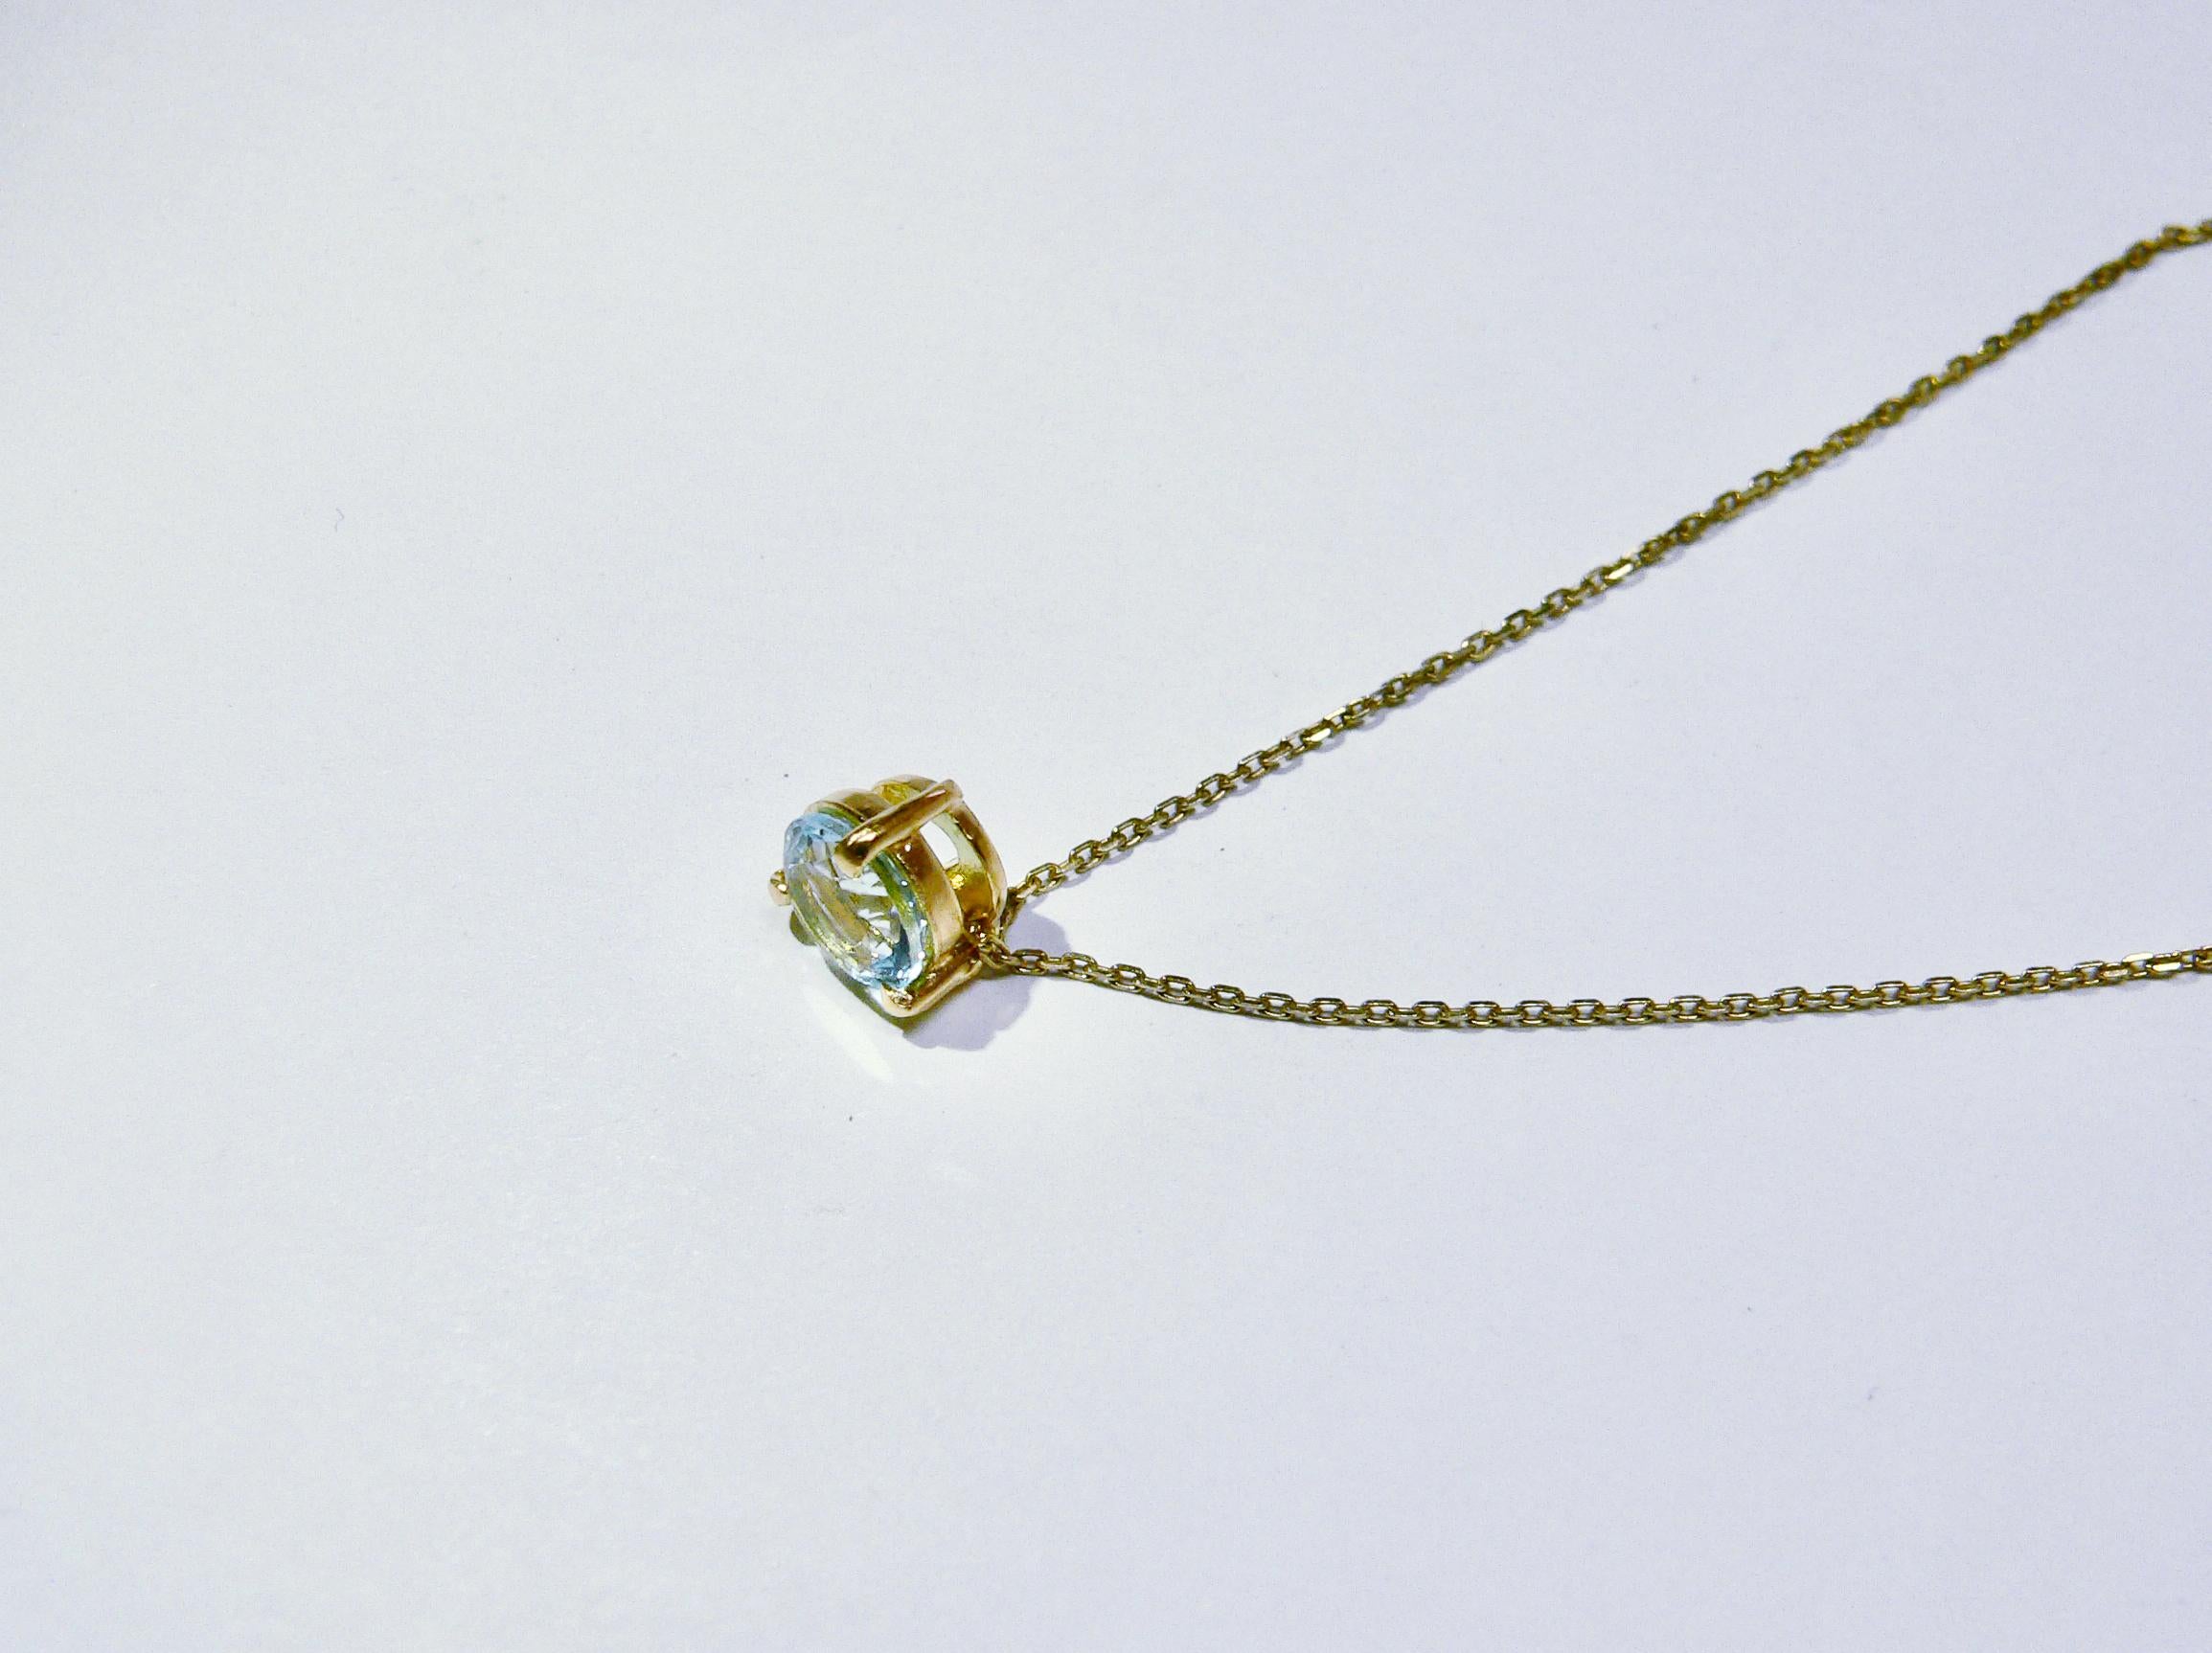 Aquamarine one stone pendant is made of Sterling Silver with 18 Karat gold plated. It is a very simple pendant, just about 7mm diameter round shape light blue color of aquamarine. There is no bail for chain, fine chain under stone. Please check the